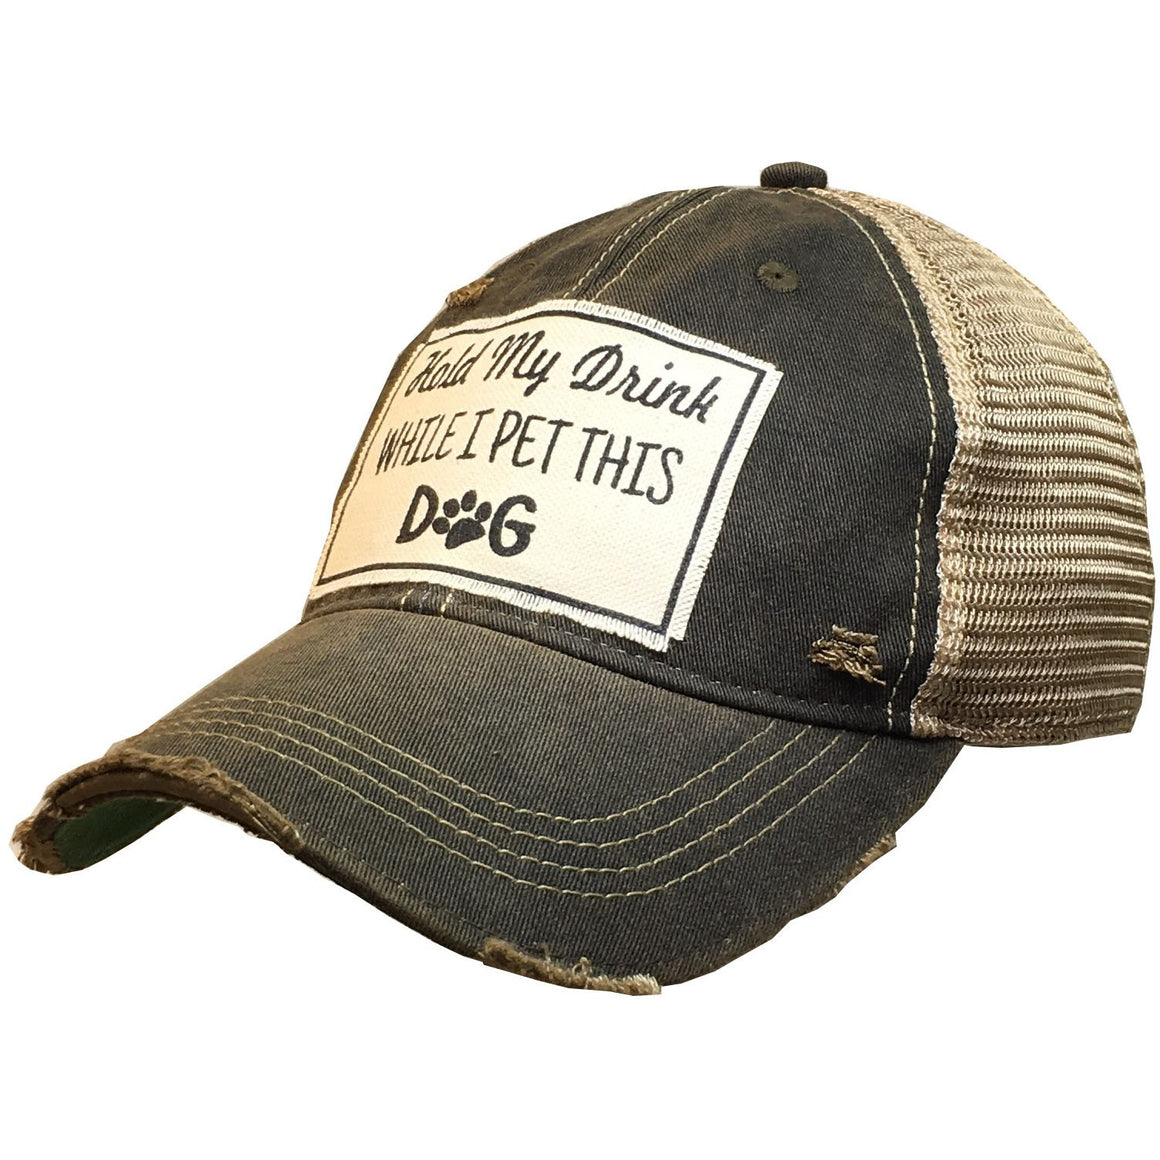 "Hold My Drink While I Pet This Dog" Distressed Trucker Cap